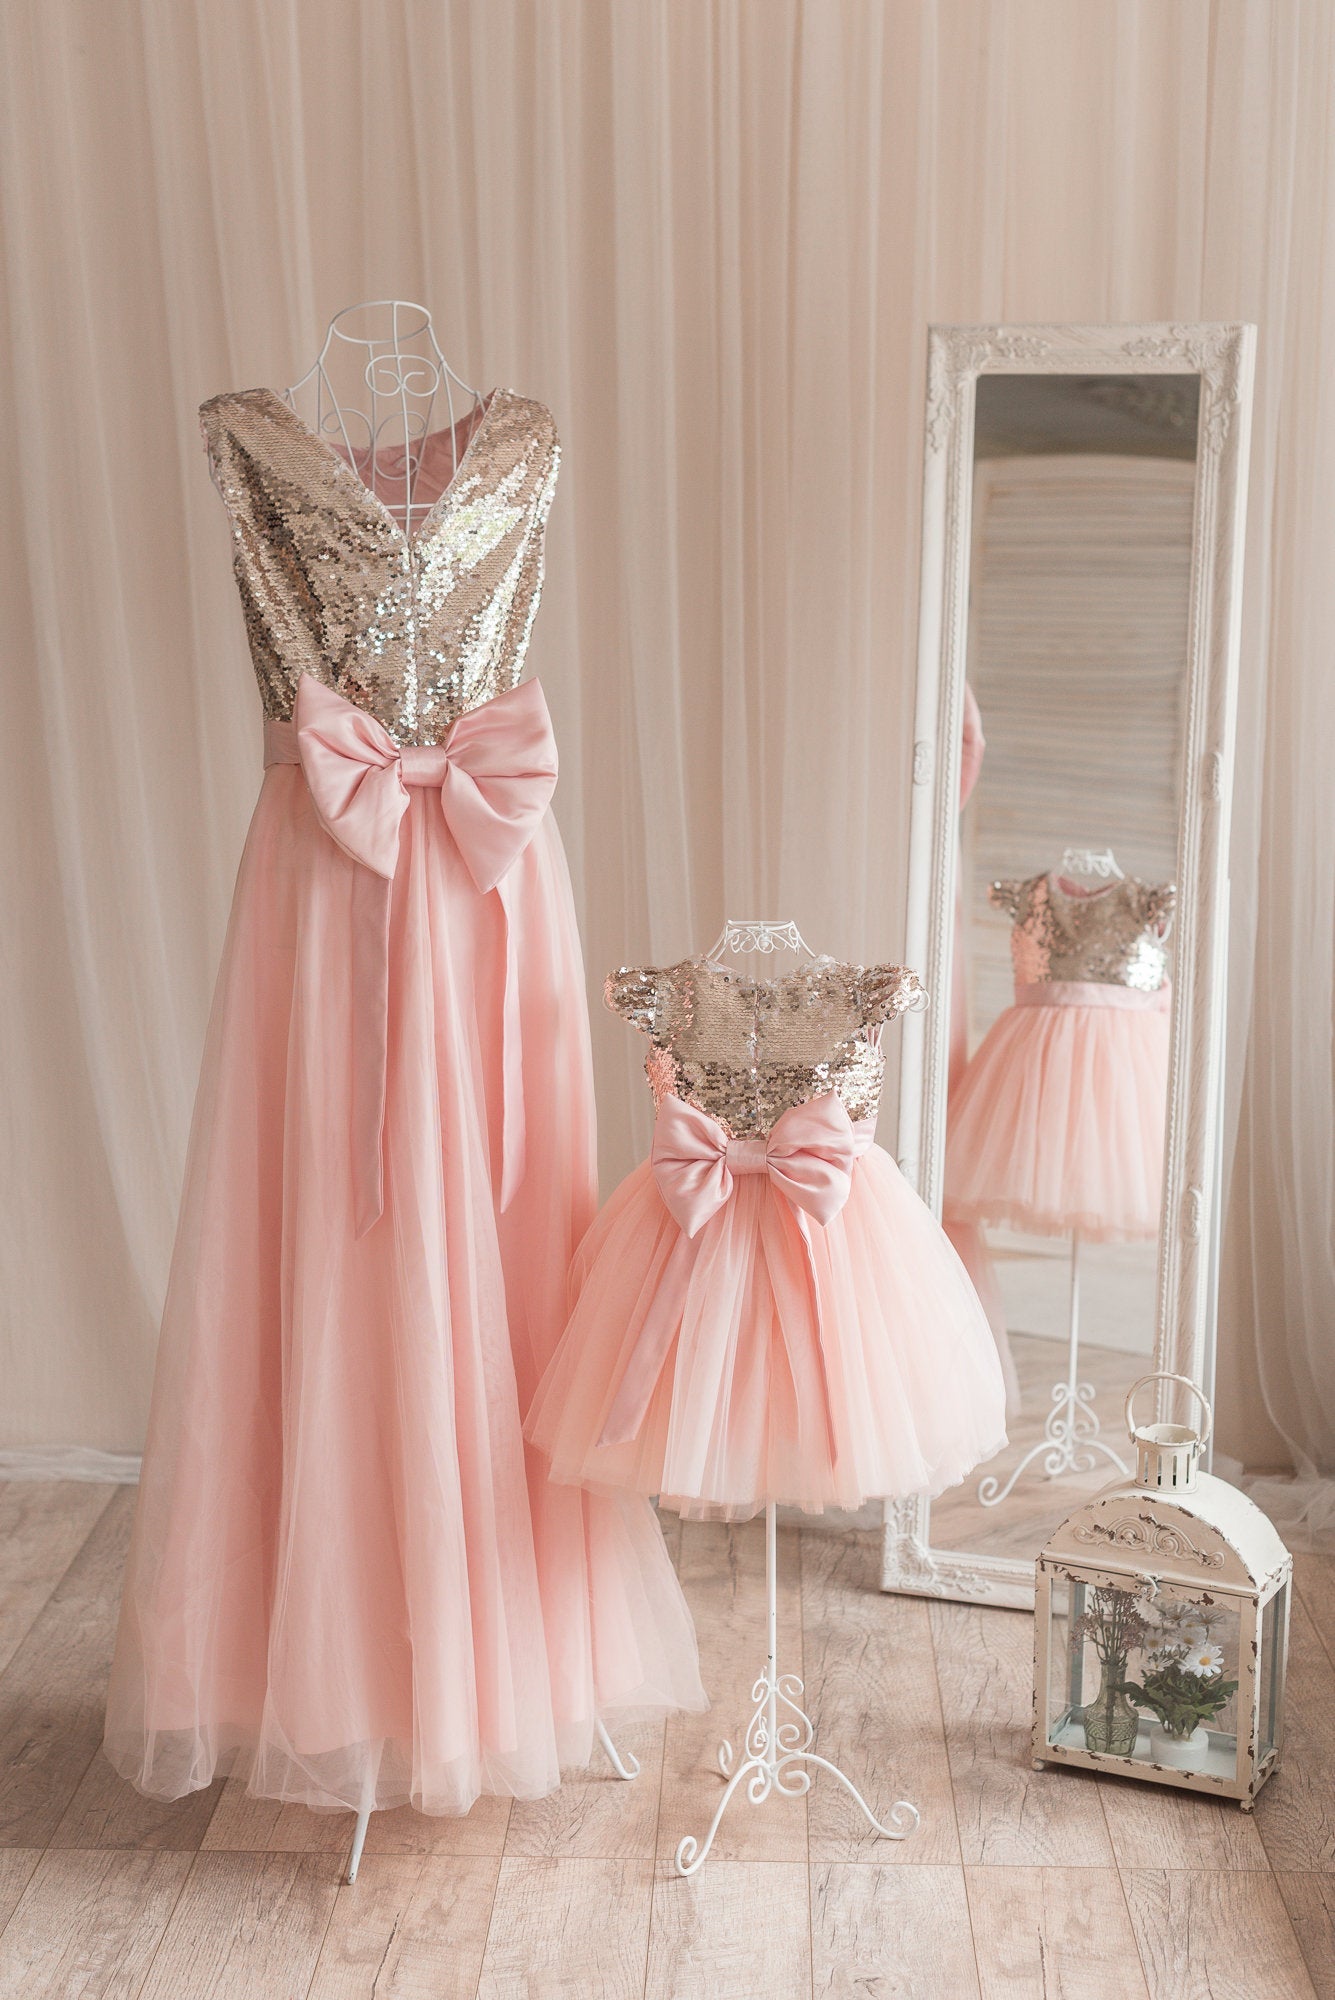 Pink Chiffon Flower Girl Dress With Beaded Details Sleeveless Infant  Christening Gown For Birthday Party And Baby Baptism M51 From Lilliantan,  $61.06 | DHgate.Com